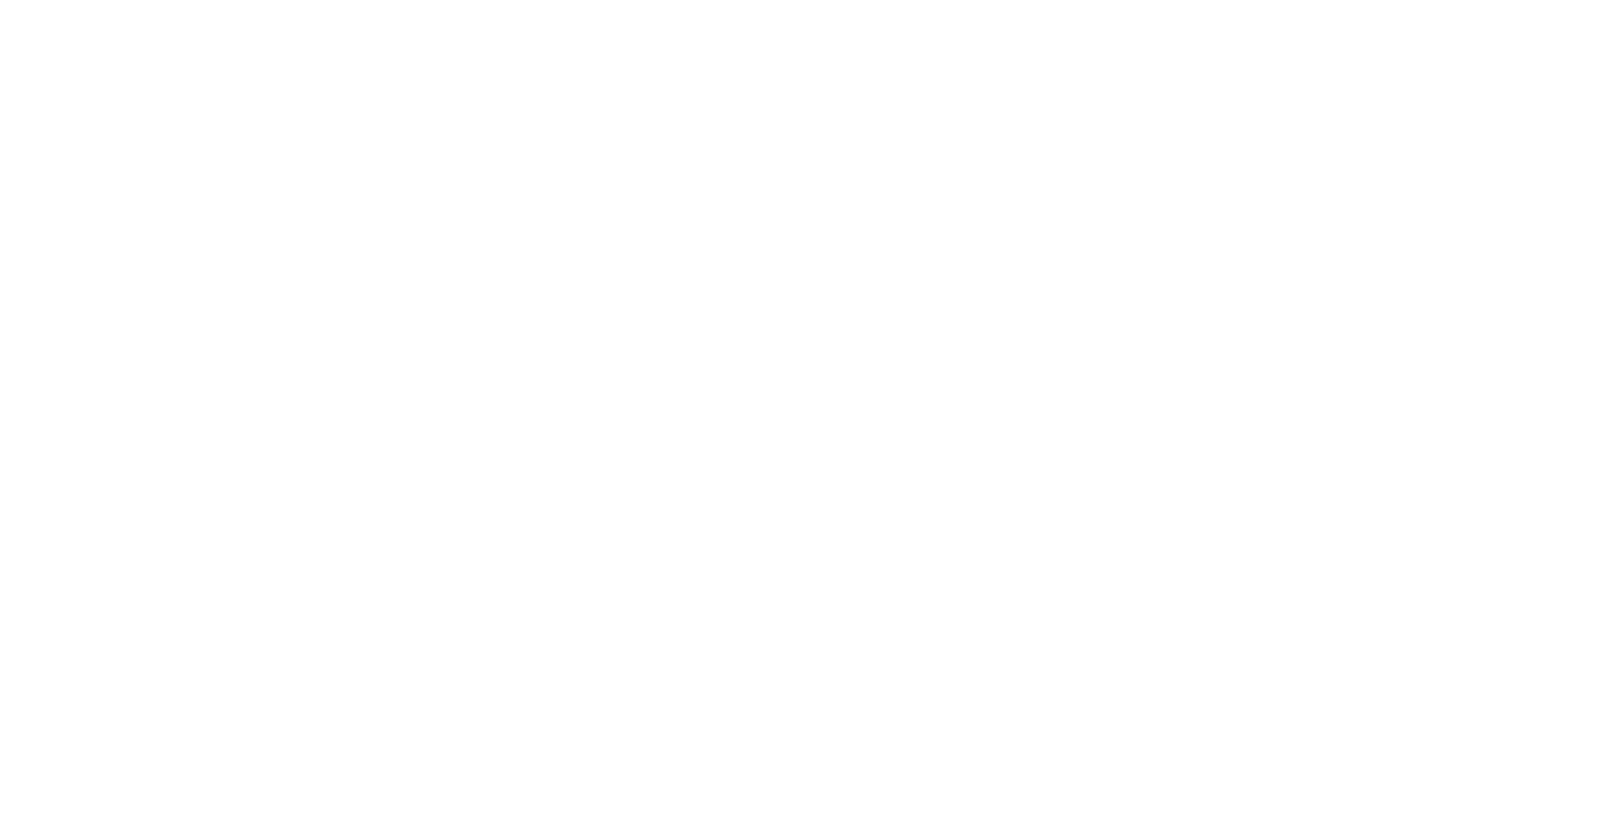 CapitaLand Mall Trust logo large for dark backgrounds (transparent PNG)